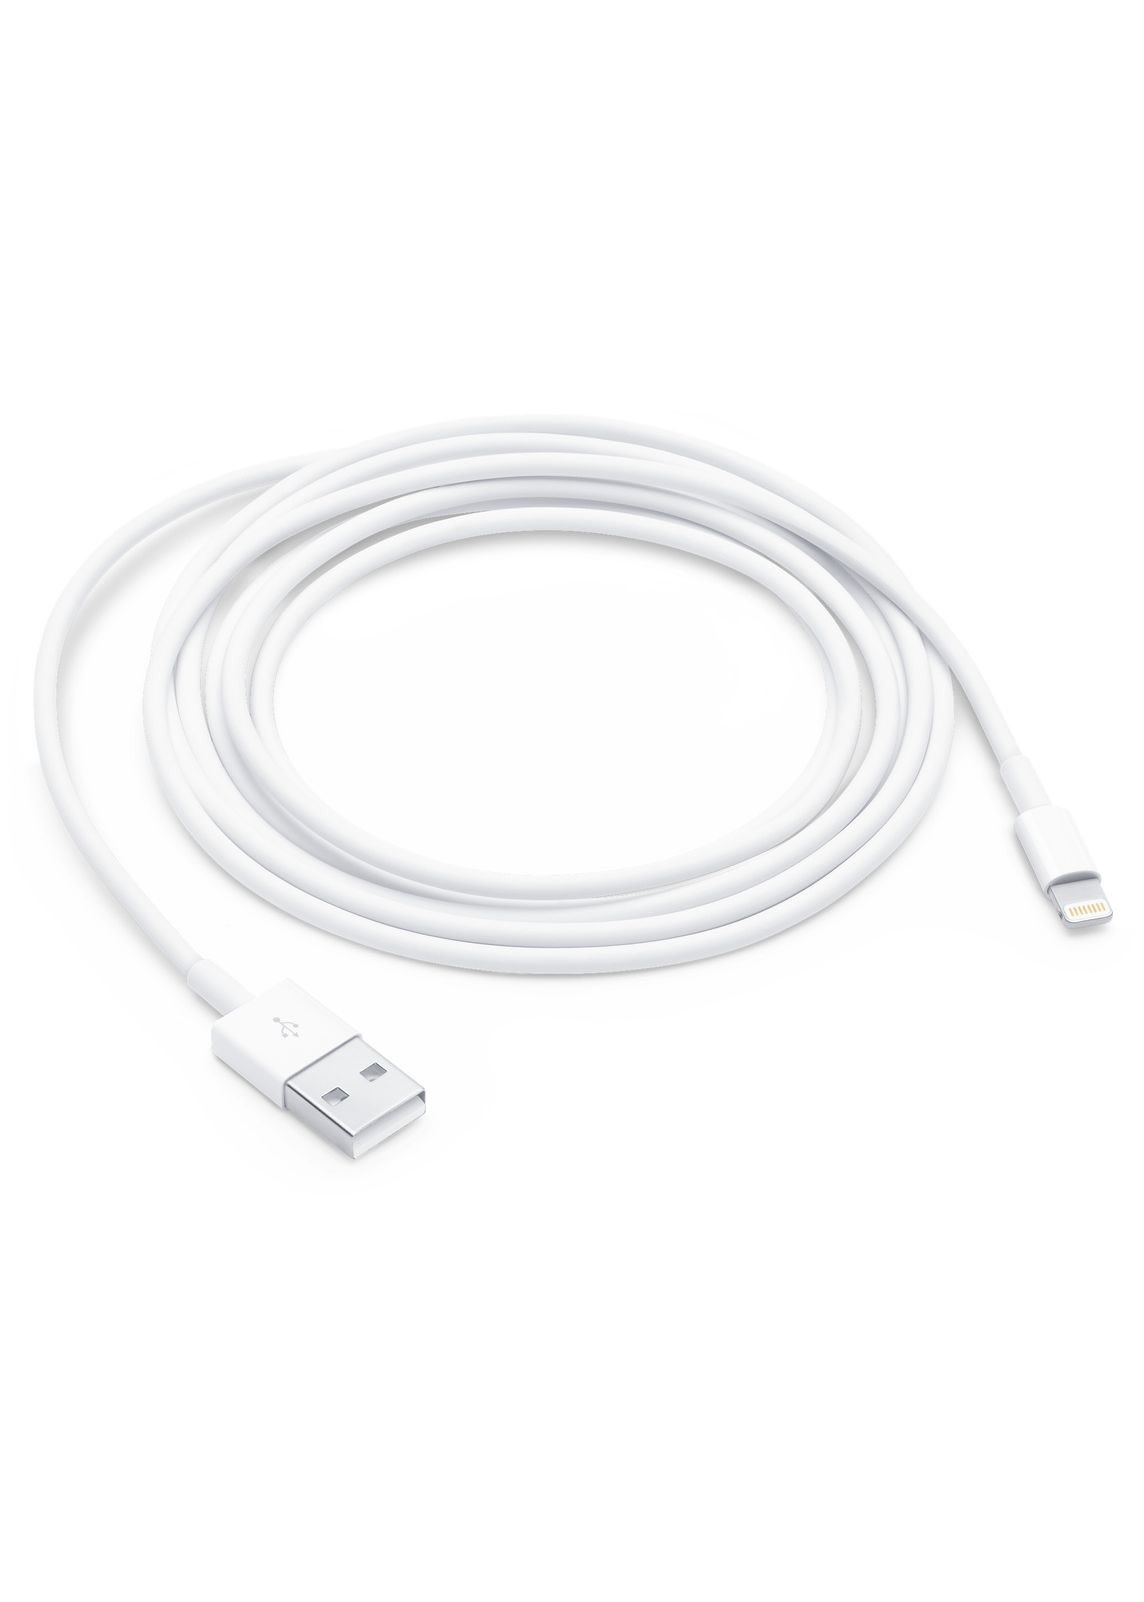 Lightning to USB Cable (2m) - iJay Store - Apple Authorized Campus Store